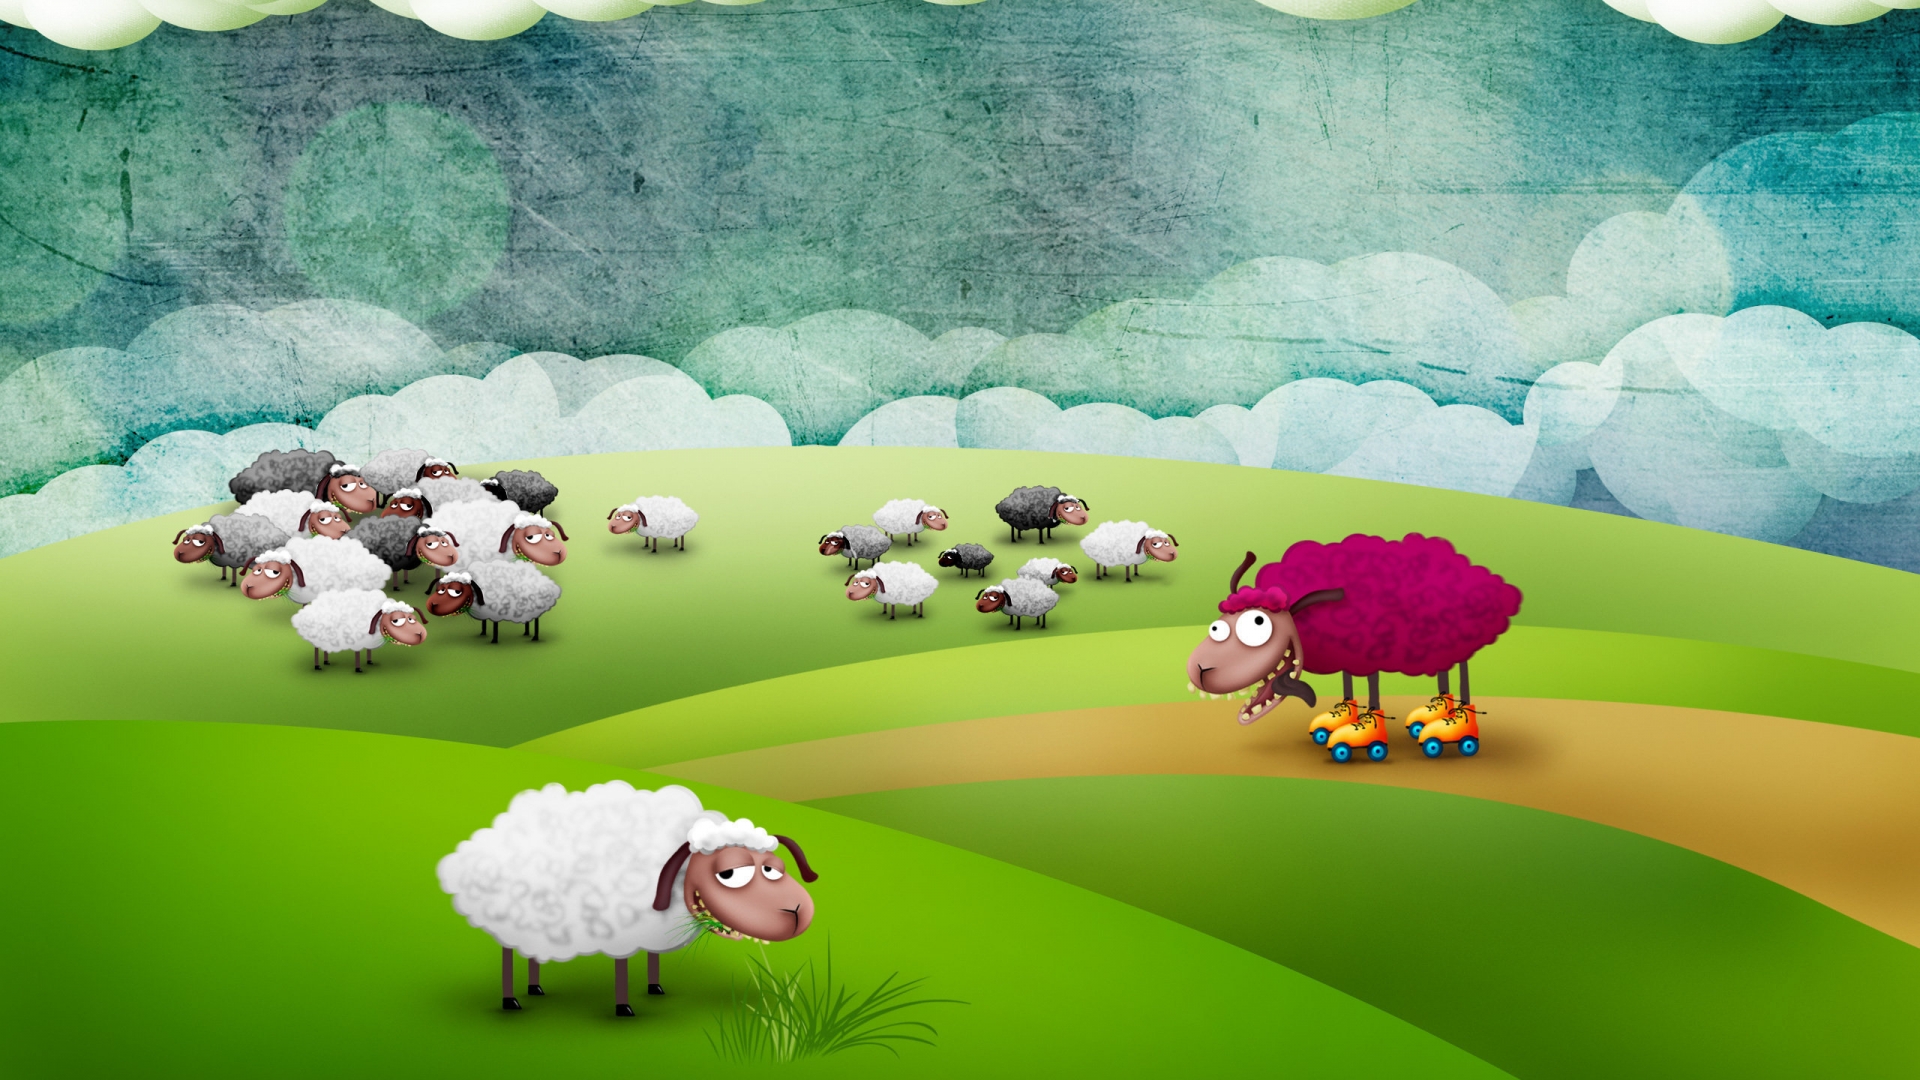 Funny Sheep for 1920 x 1080 HDTV 1080p resolution